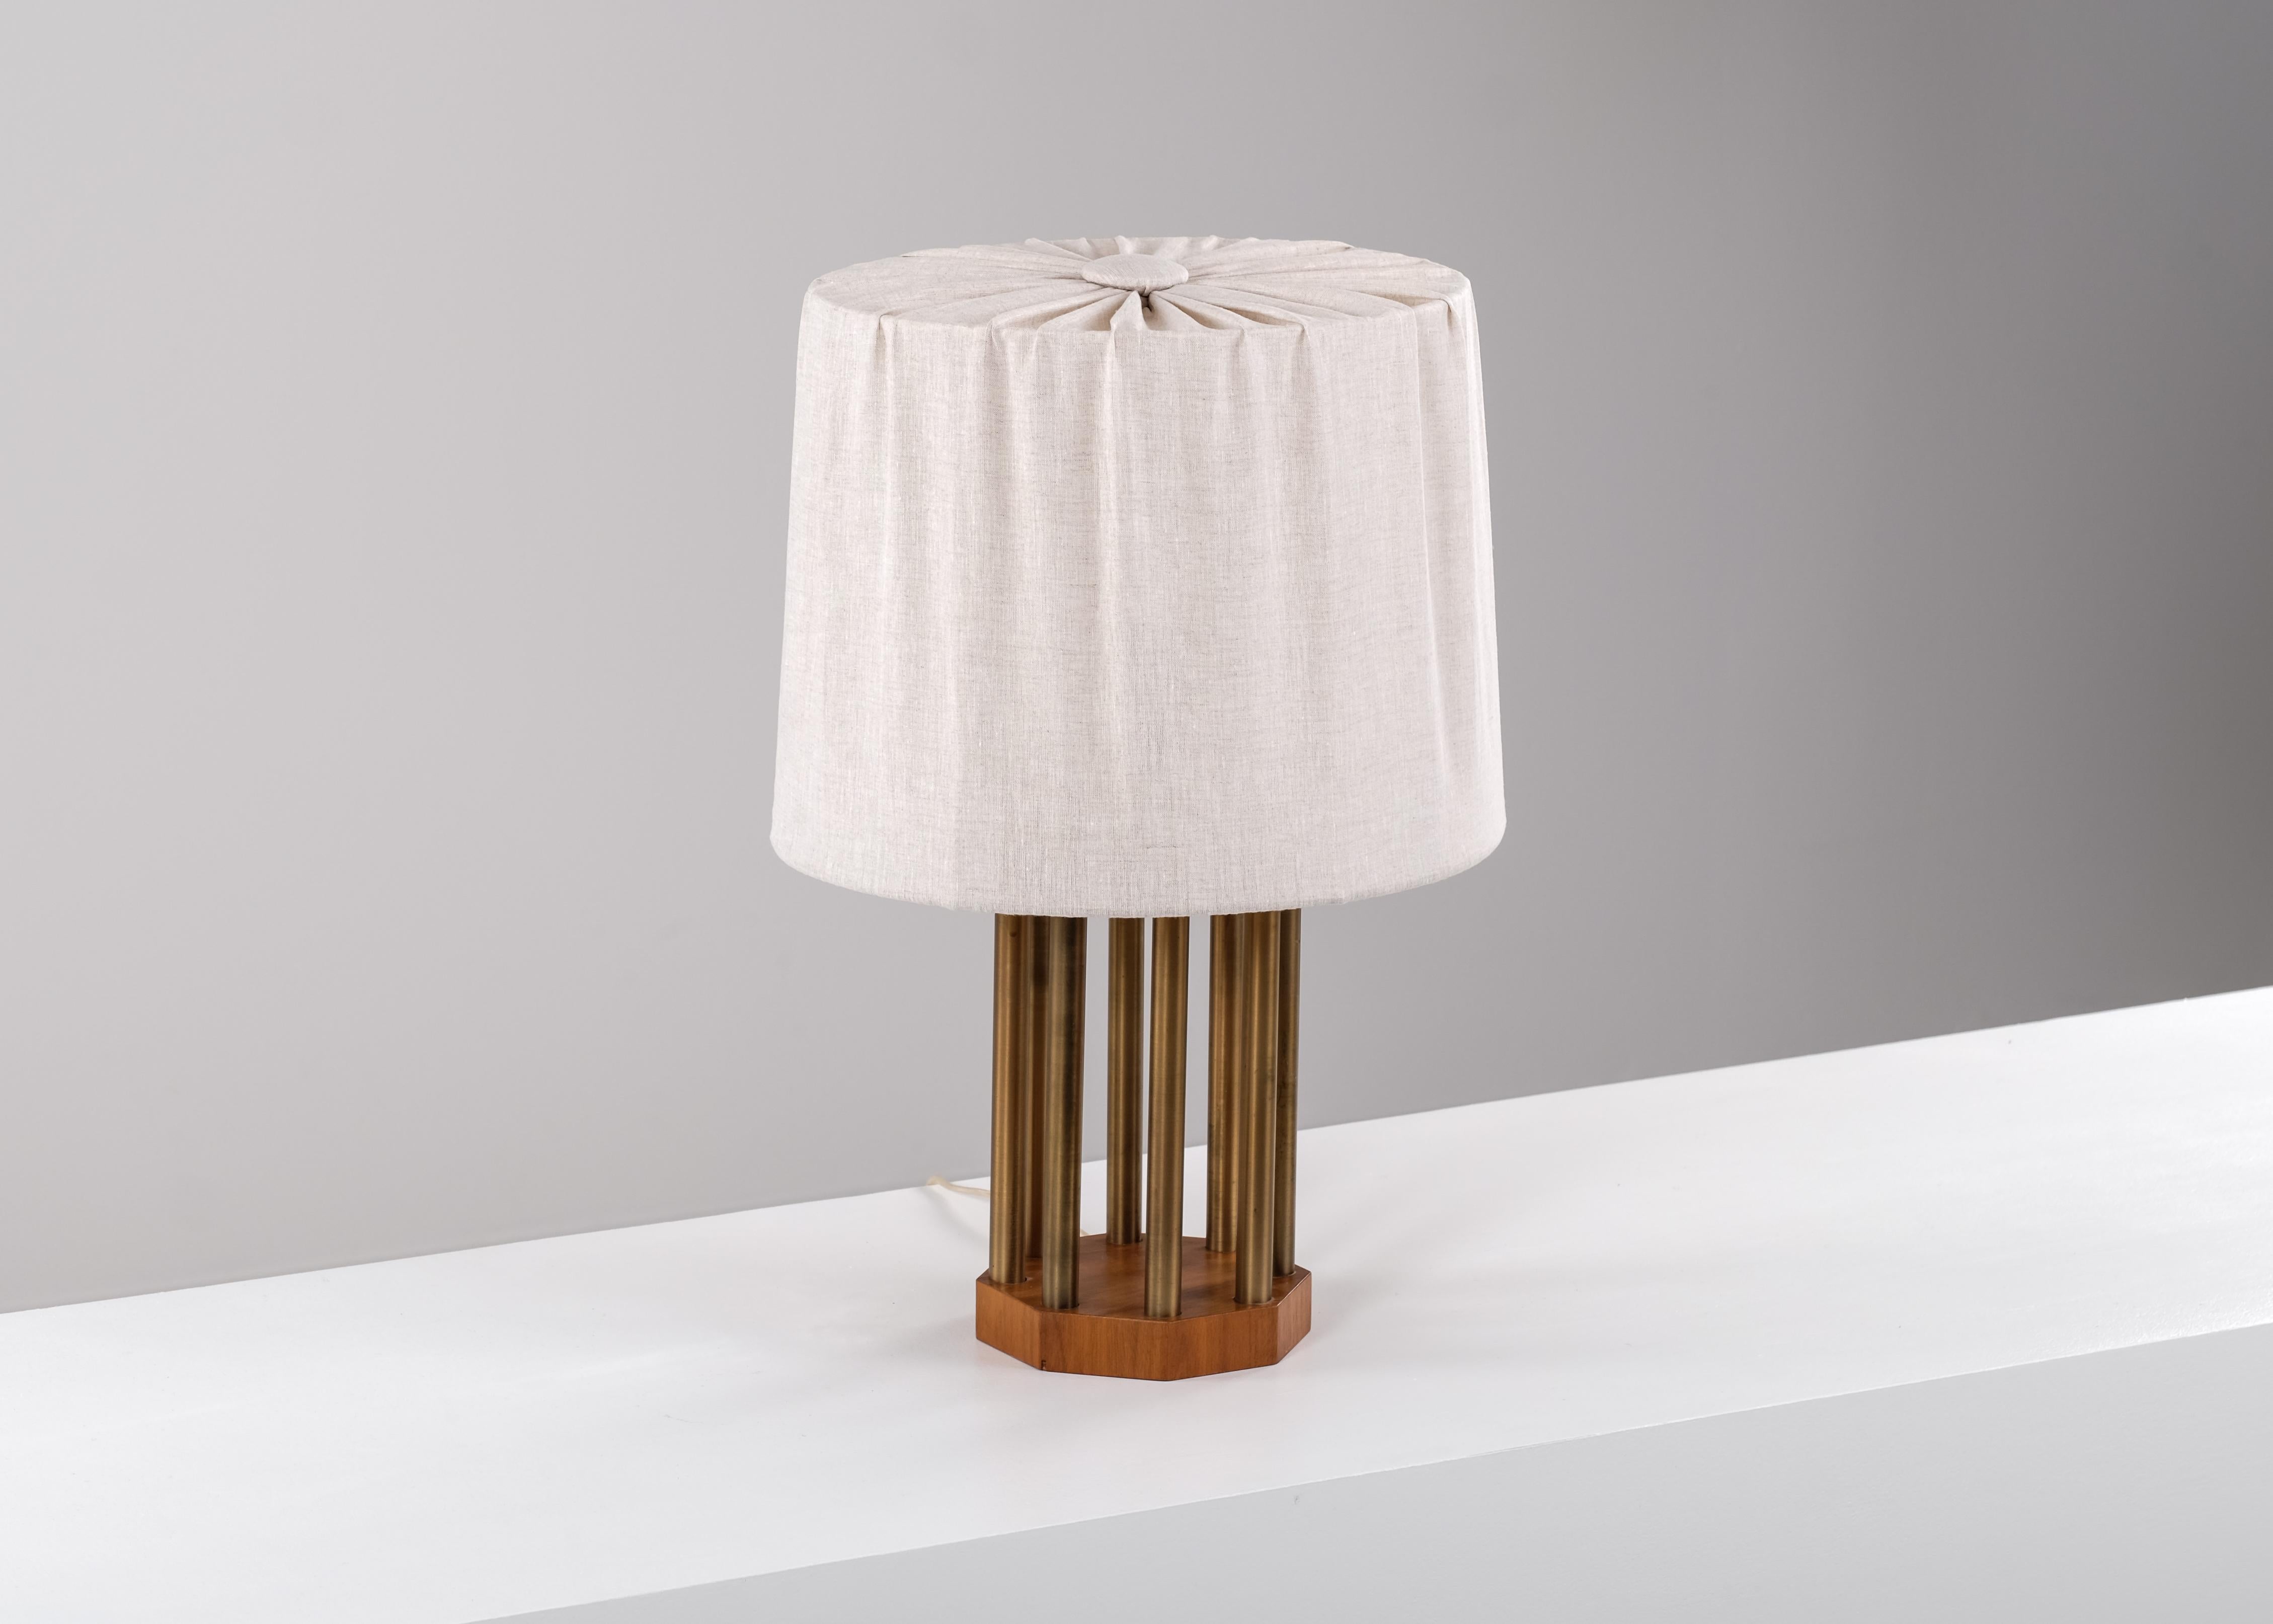 Rare Swedish Brass Table Lamp, 1950s In Good Condition For Sale In Stockholm, SE